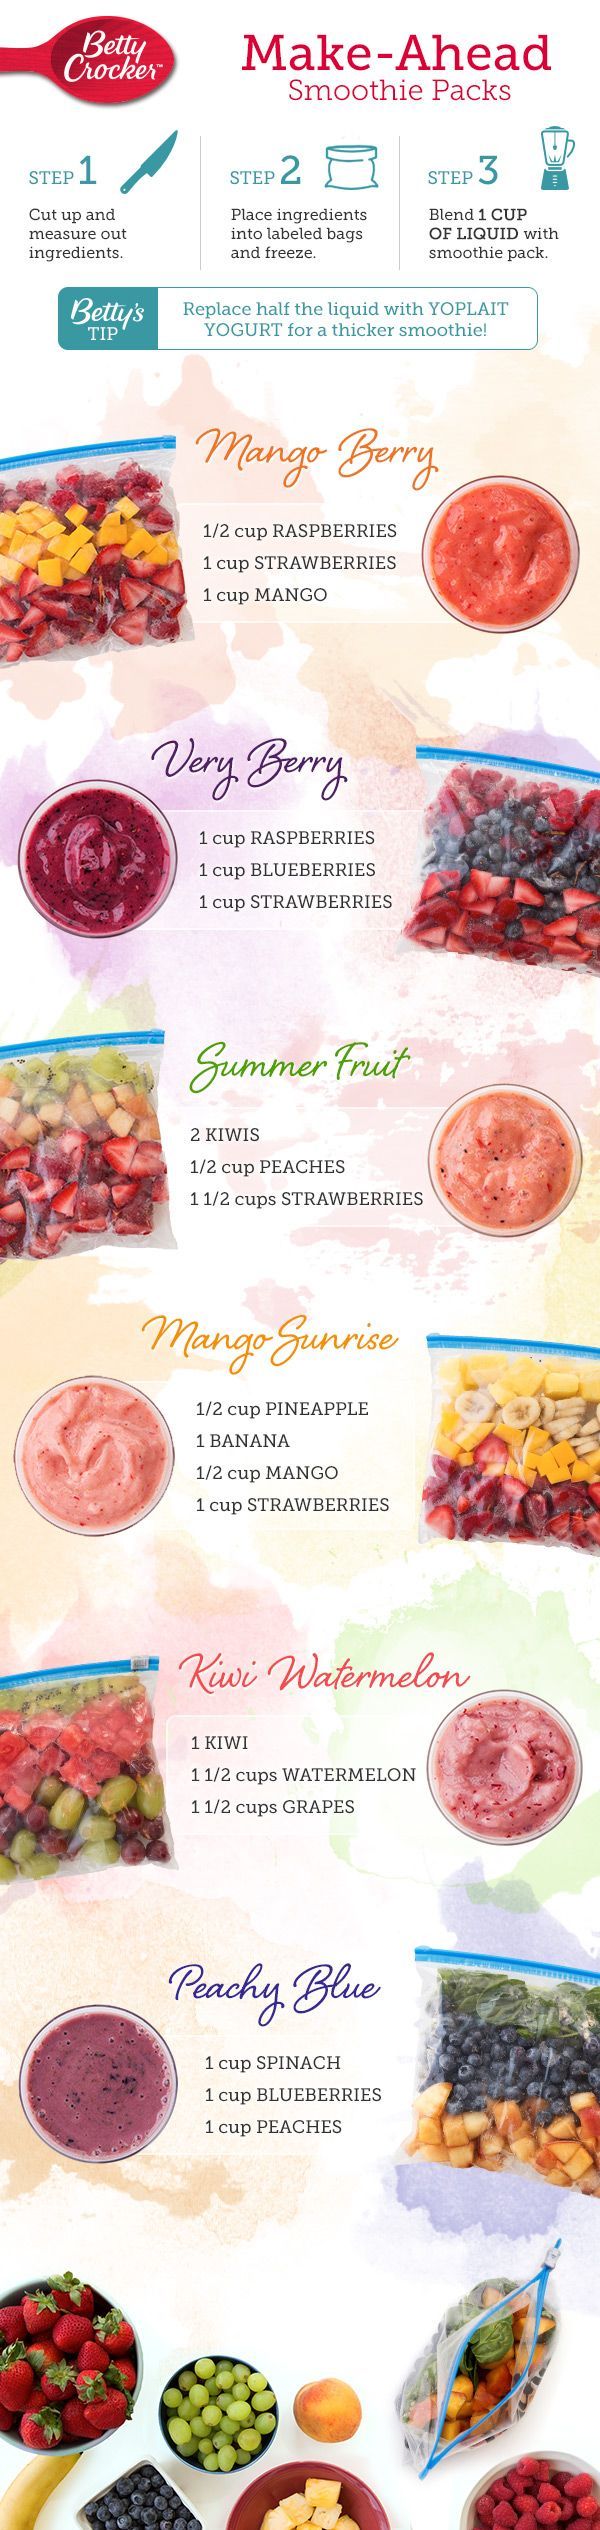 Don’t have time to make #smoothies in the morning? Well then this is perfect for you! These make-ahead smoothie packs will